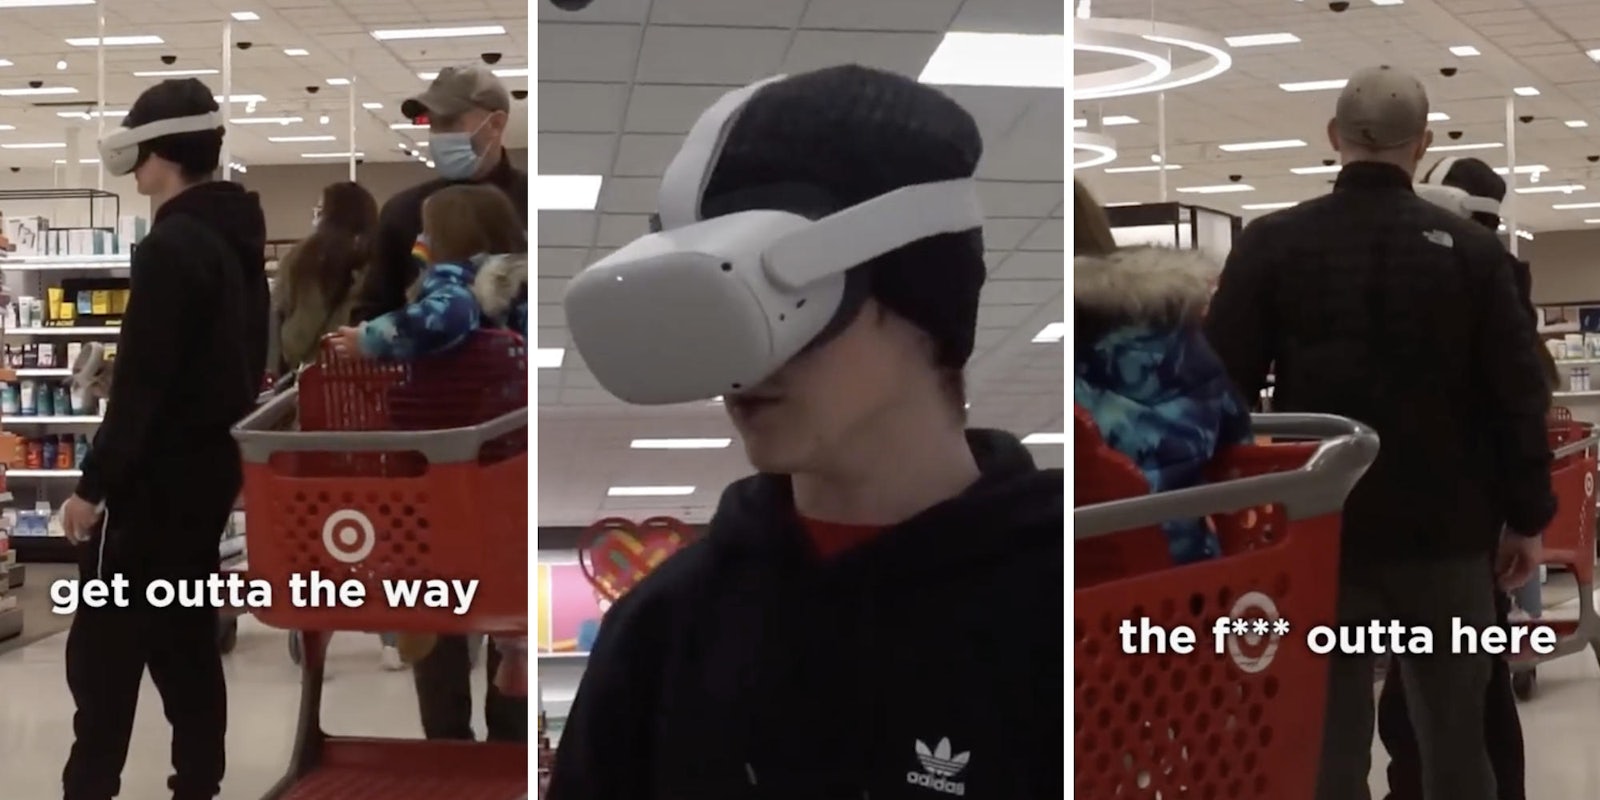 person using VR (m) customer confronting the person using VR (l) (r)